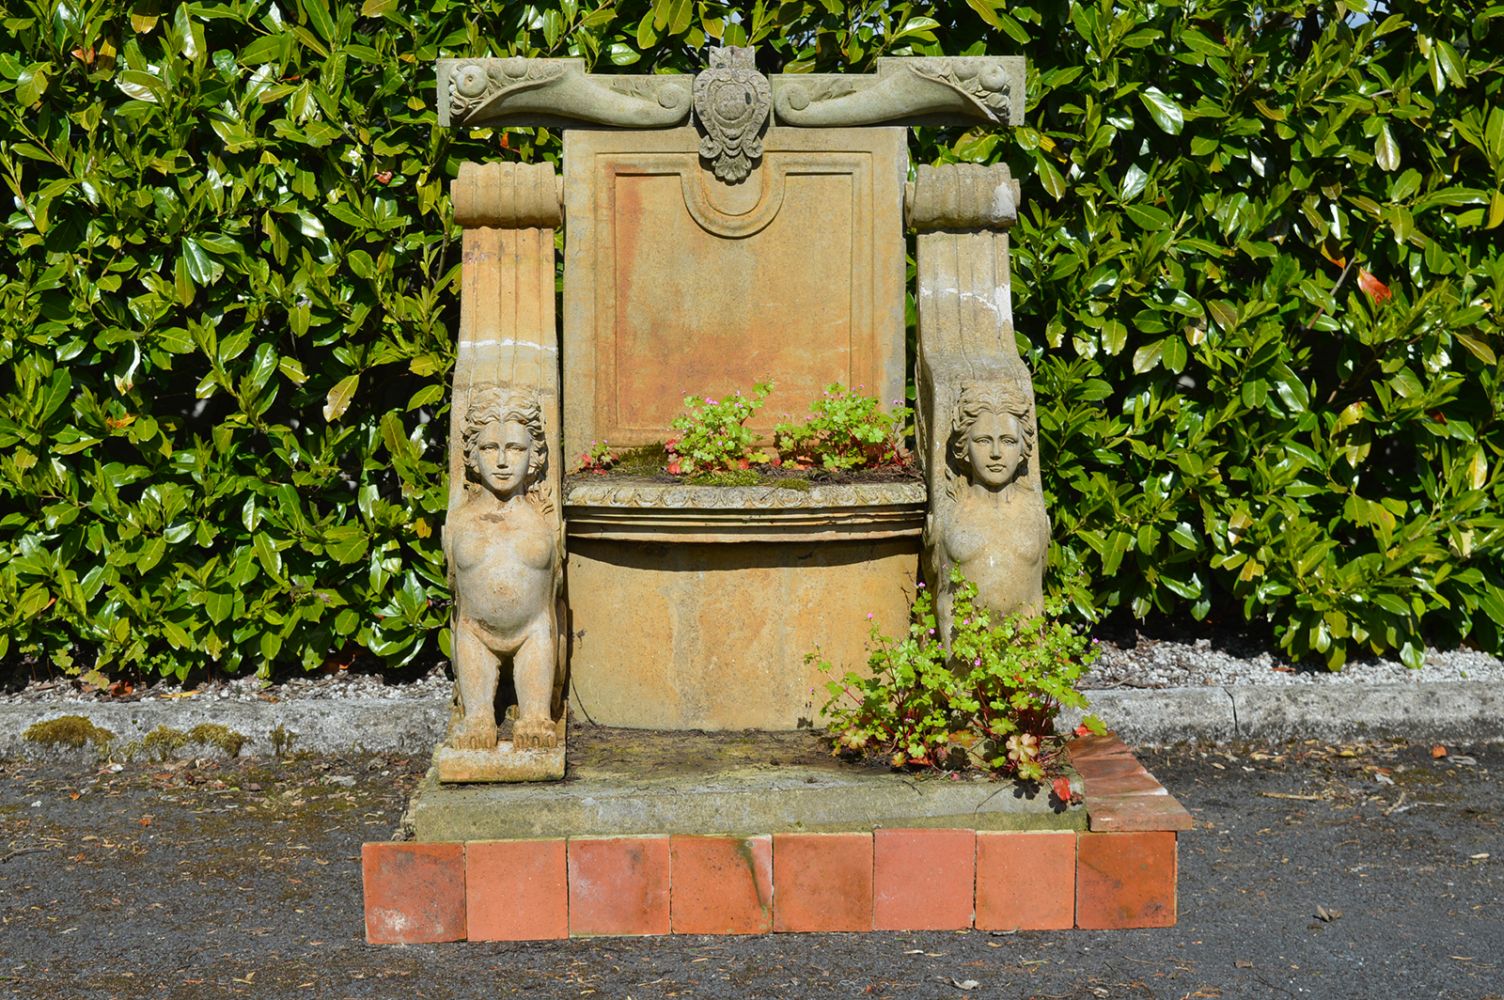 MOULDED STONE CEREMONIAL GARDEN SEAT - Image 2 of 7